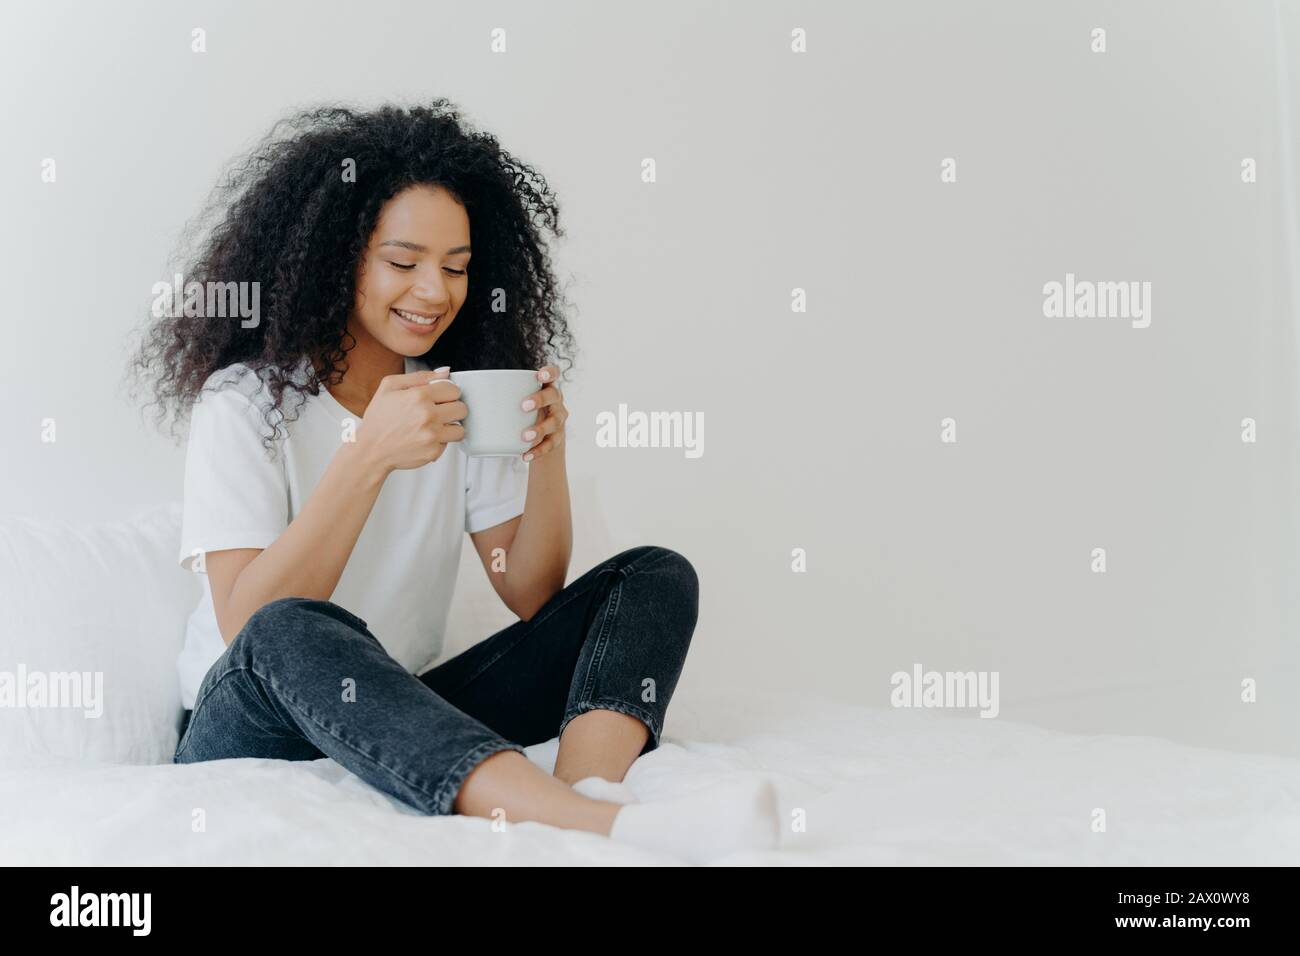 African American woman sips hot drink, poses in bed, enjoys good morning, dressed casually, spends weekend at home, blank space aside for your adverti Stock Photo